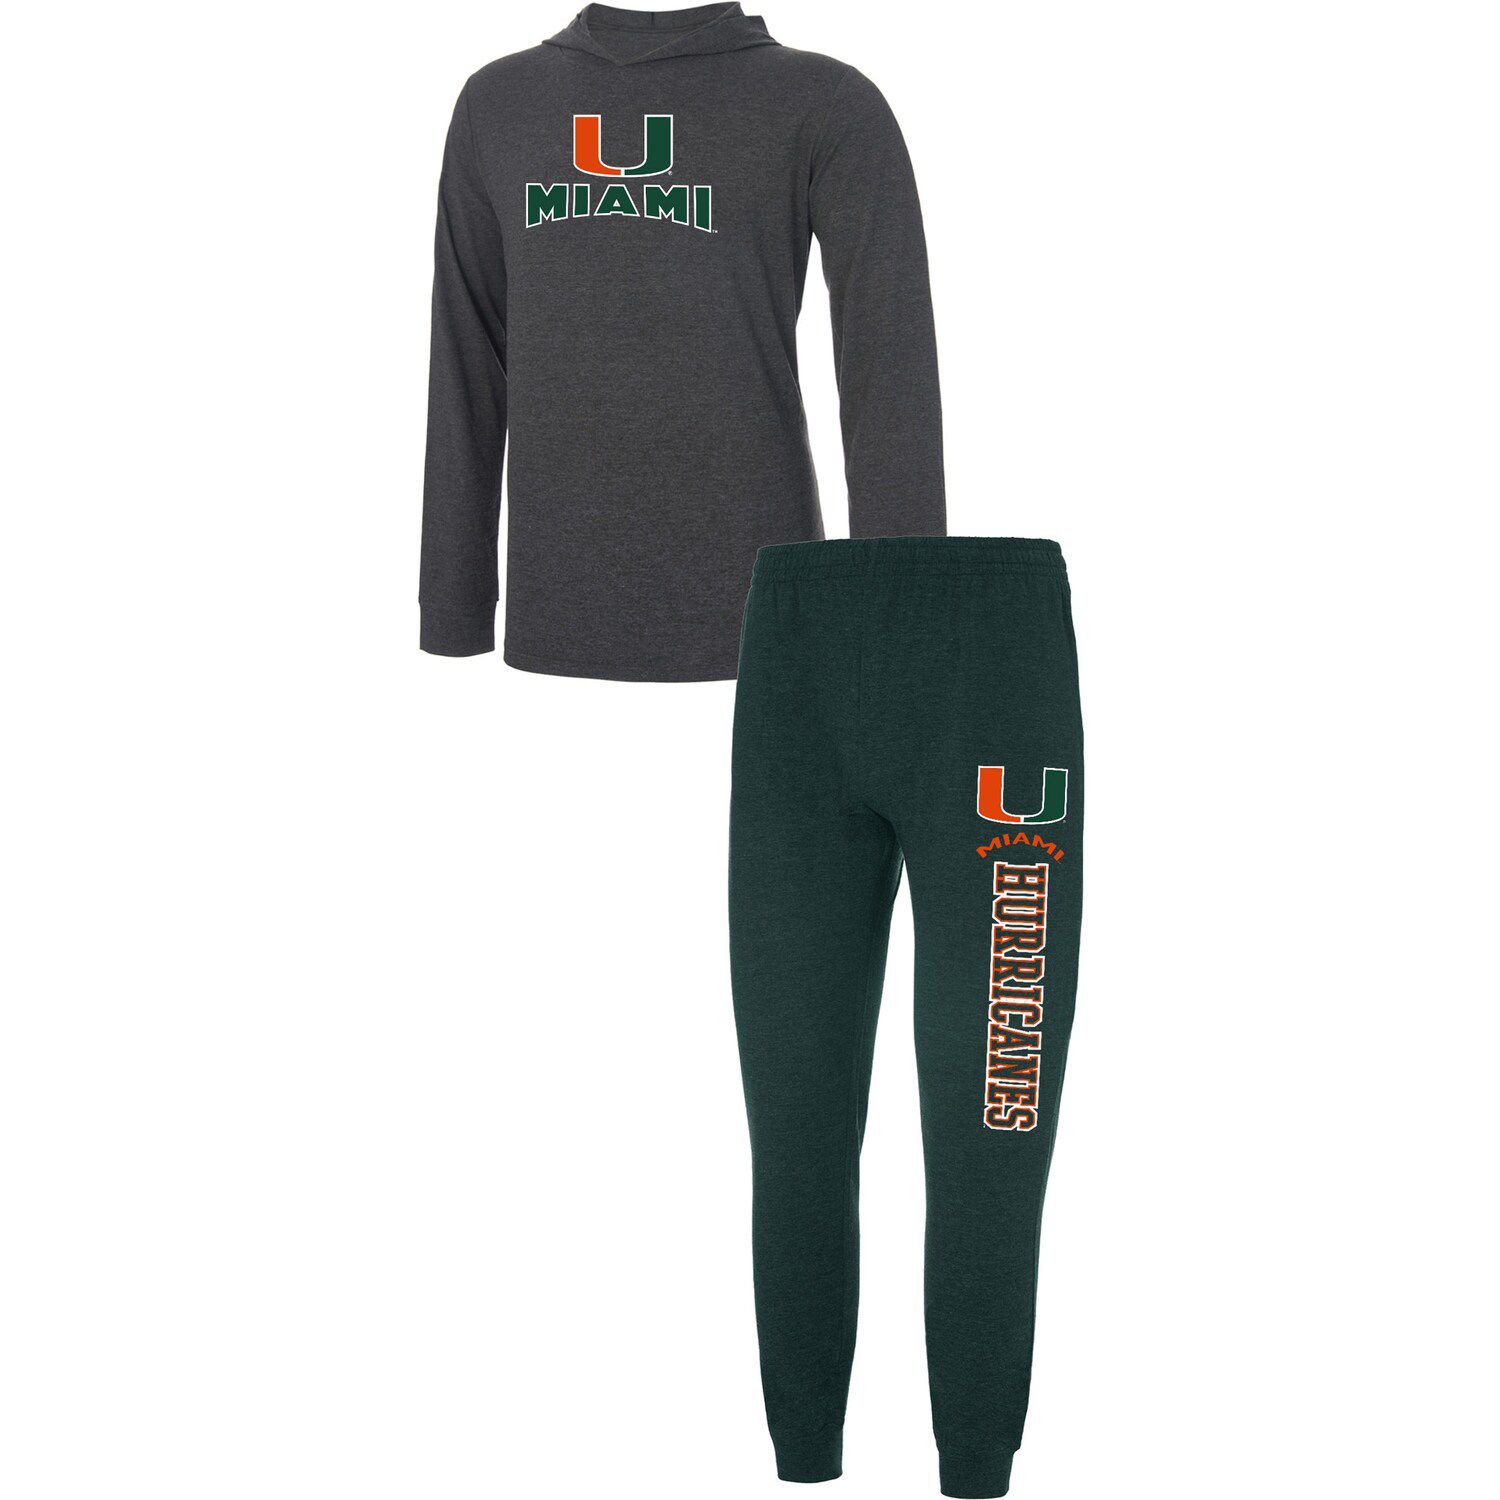 Image for Unbranded Men's Concepts Sport Green/Charcoal Miami Hurricanes Meter Long Sleeve Hoodie T-Shirt & Jogger Pants Set at Kohl's.